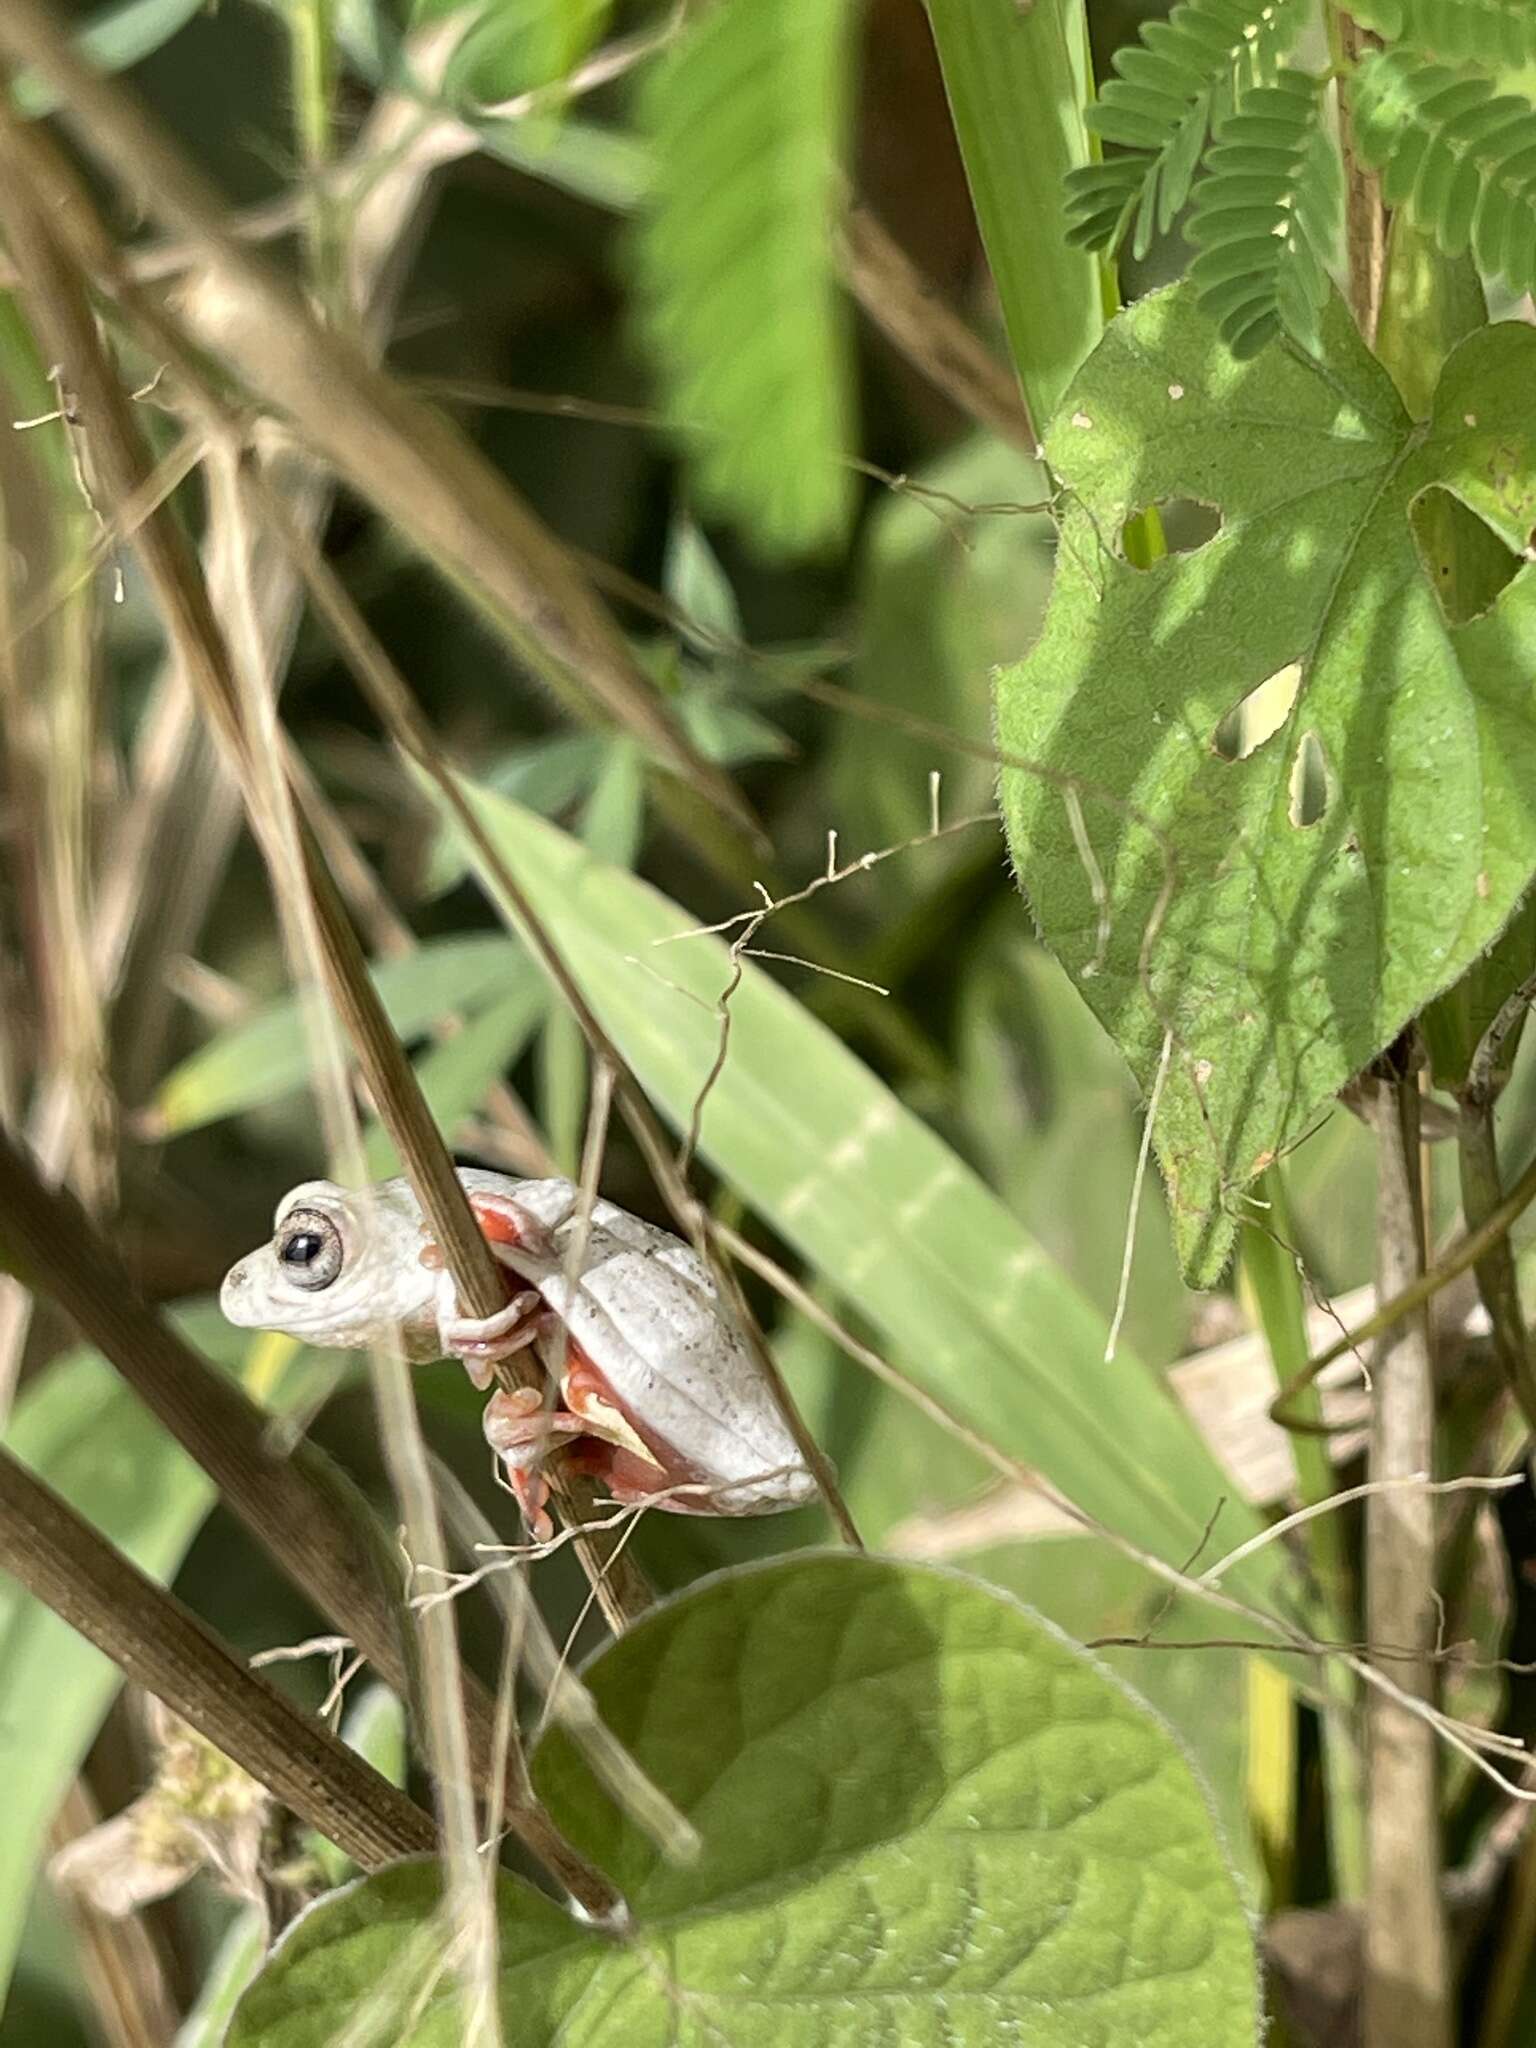 Image of Balfour's Reed Frog